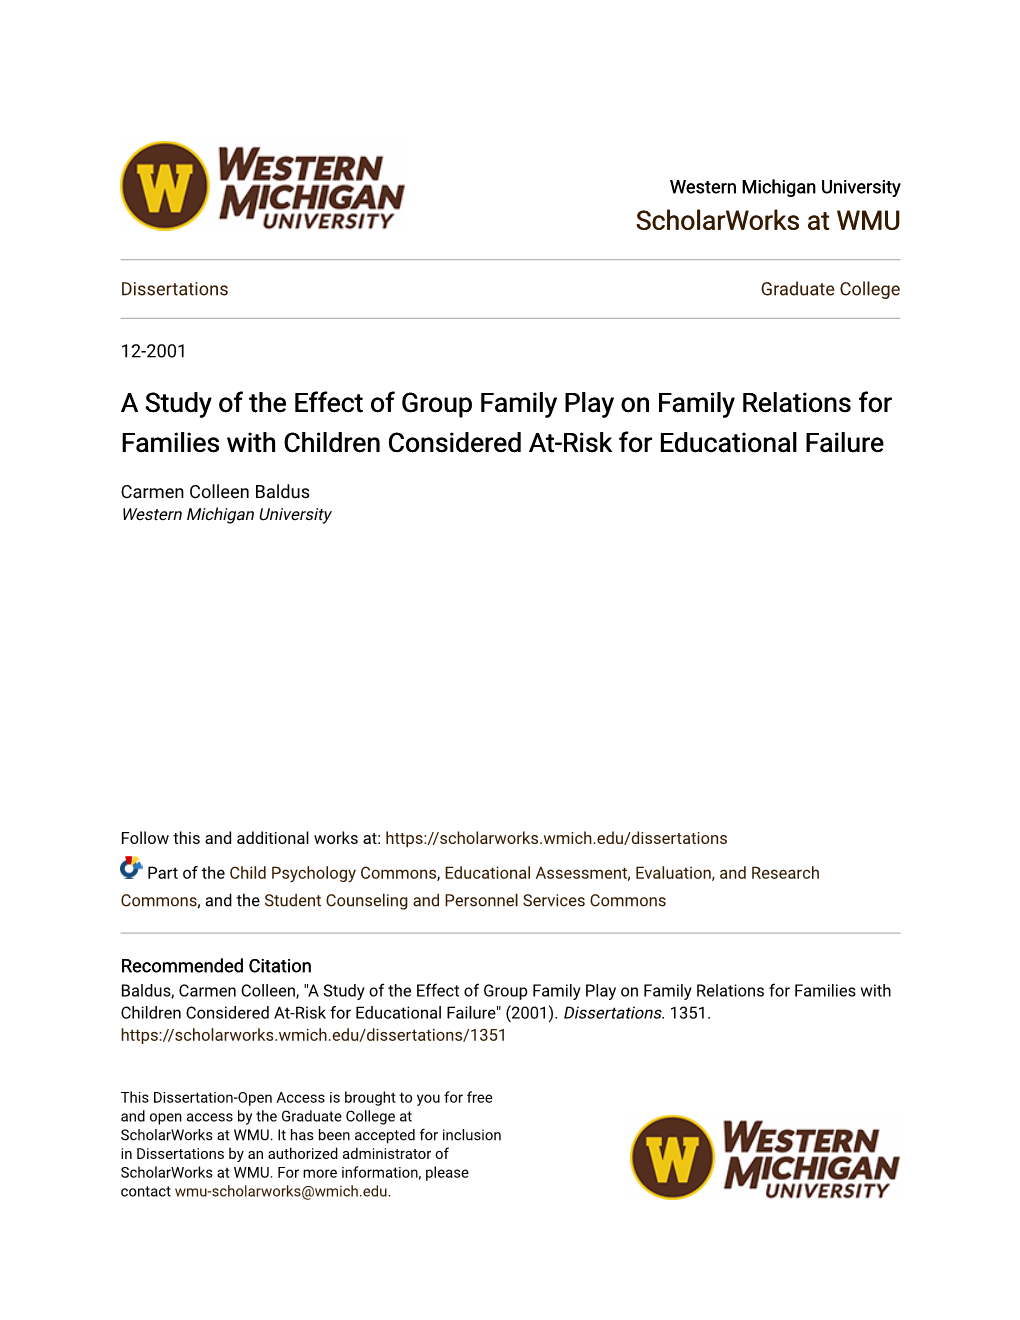 A Study of the Effect of Group Family Play on Family Relations for Families with Children Considered At-Risk for Educational Failure